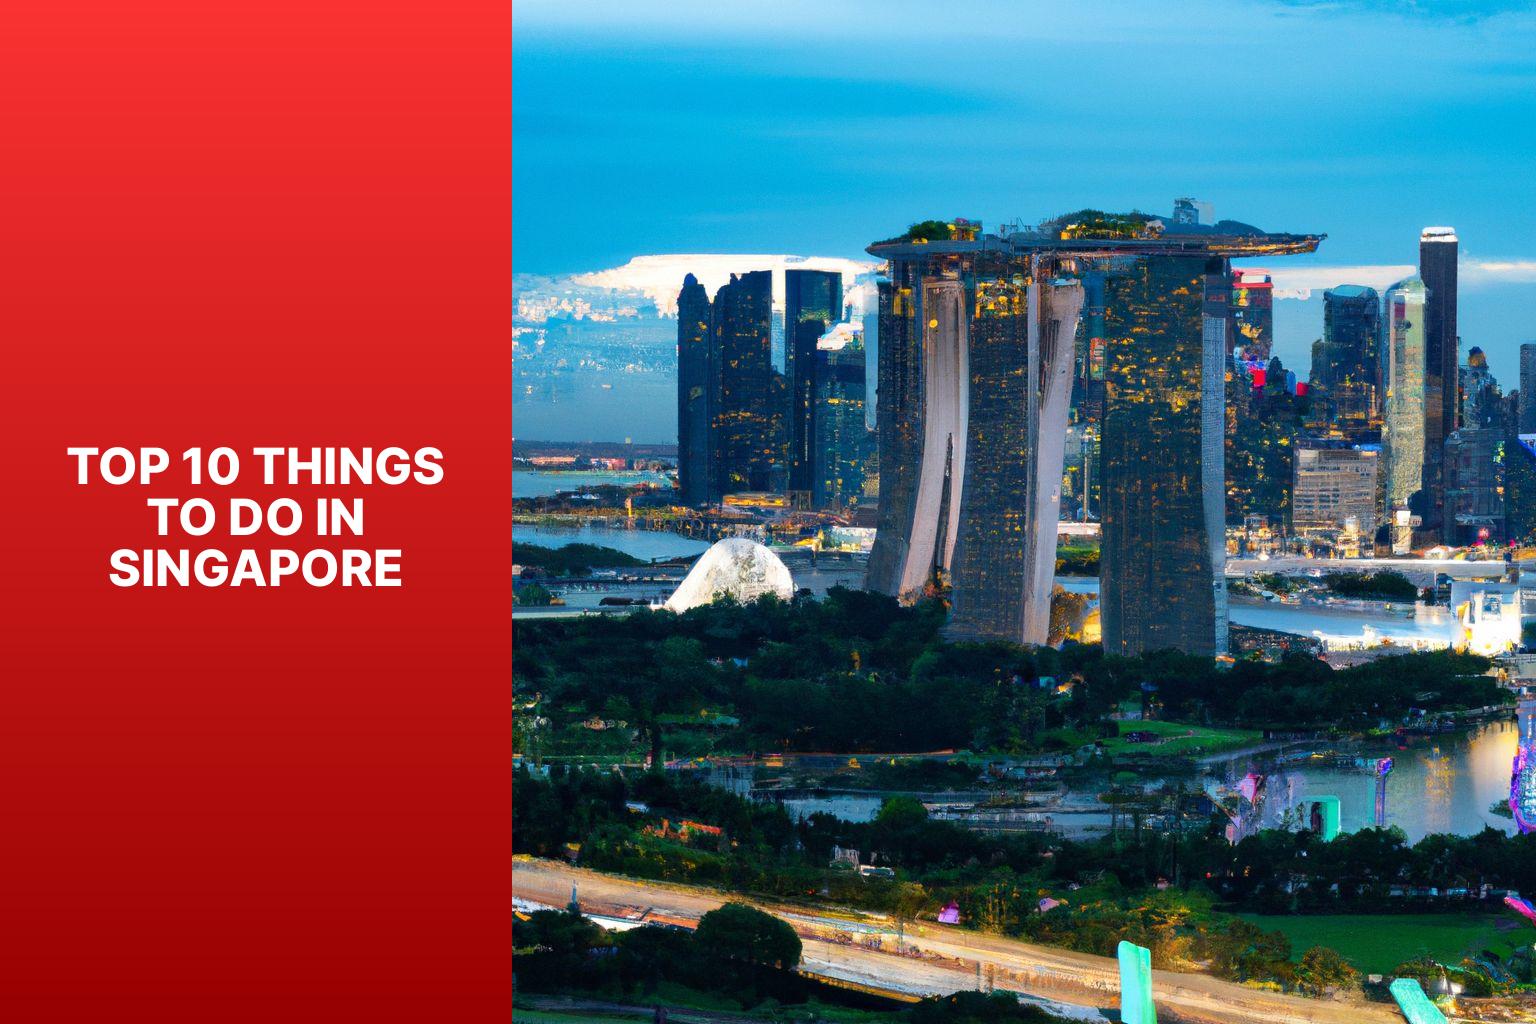 Top 10 Things to do in Singapore